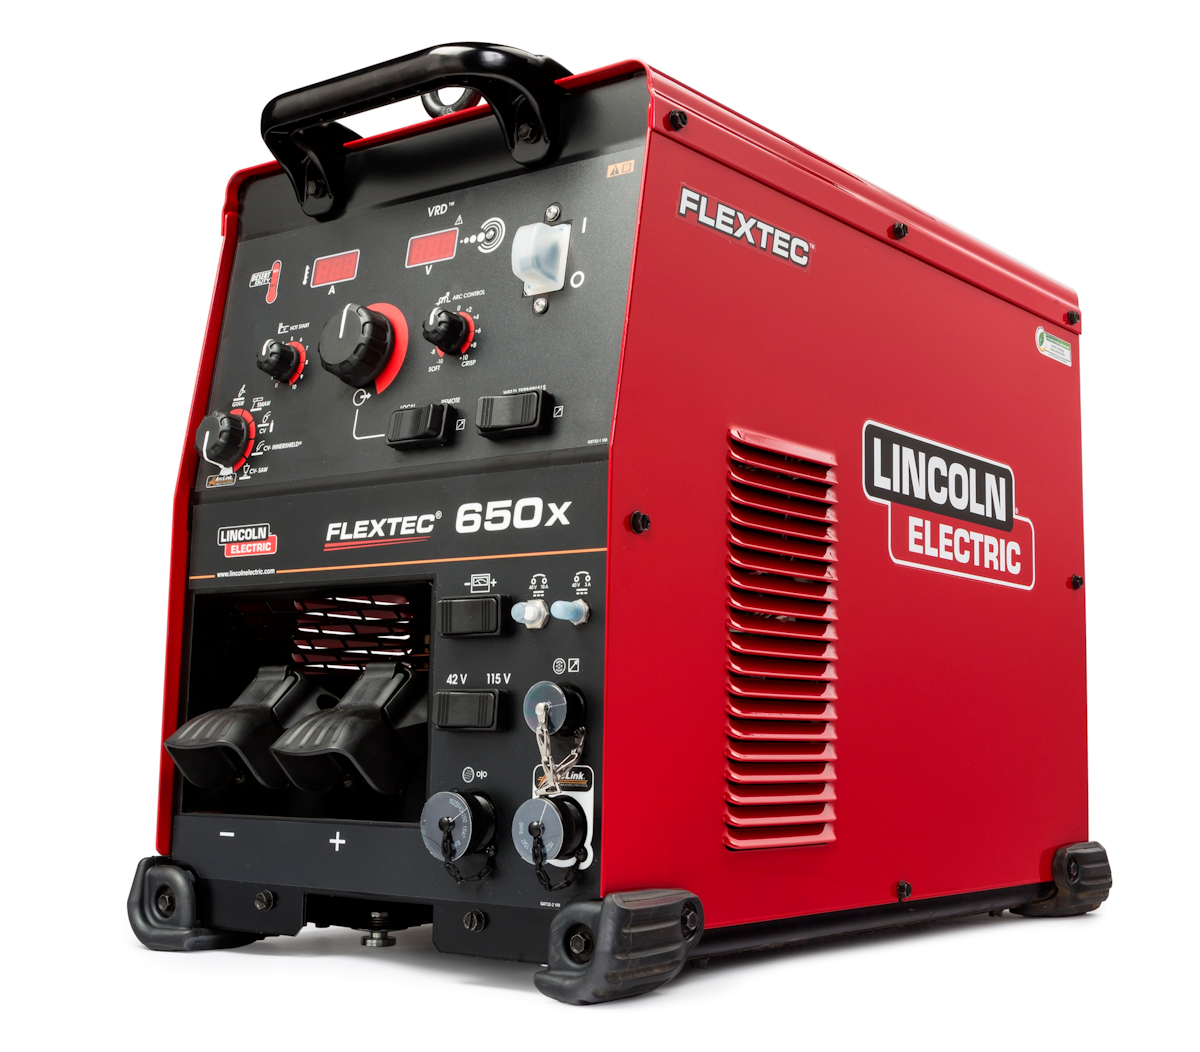 lincoln-electric-flextec-650x-multi-process-welder-from-lincoln